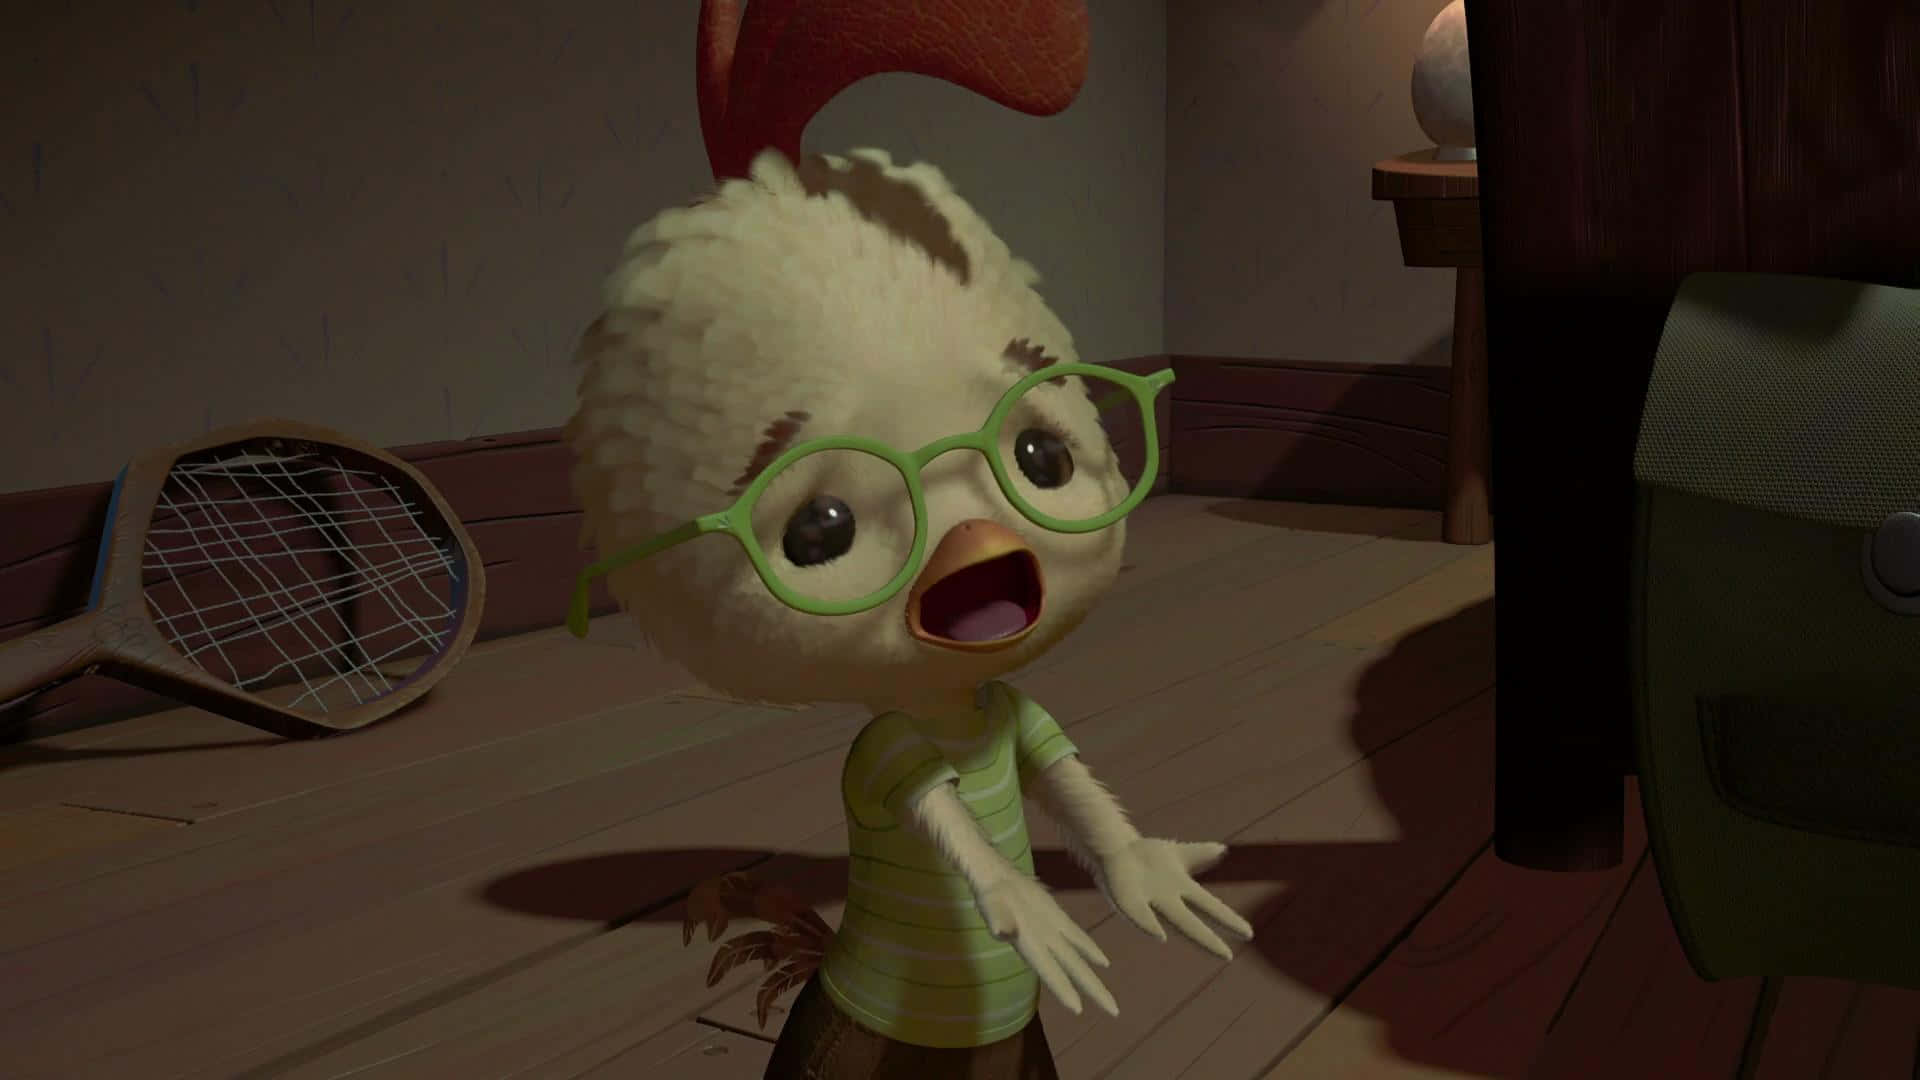 Chicken Little discovers there is more to be scared of than he thinks!